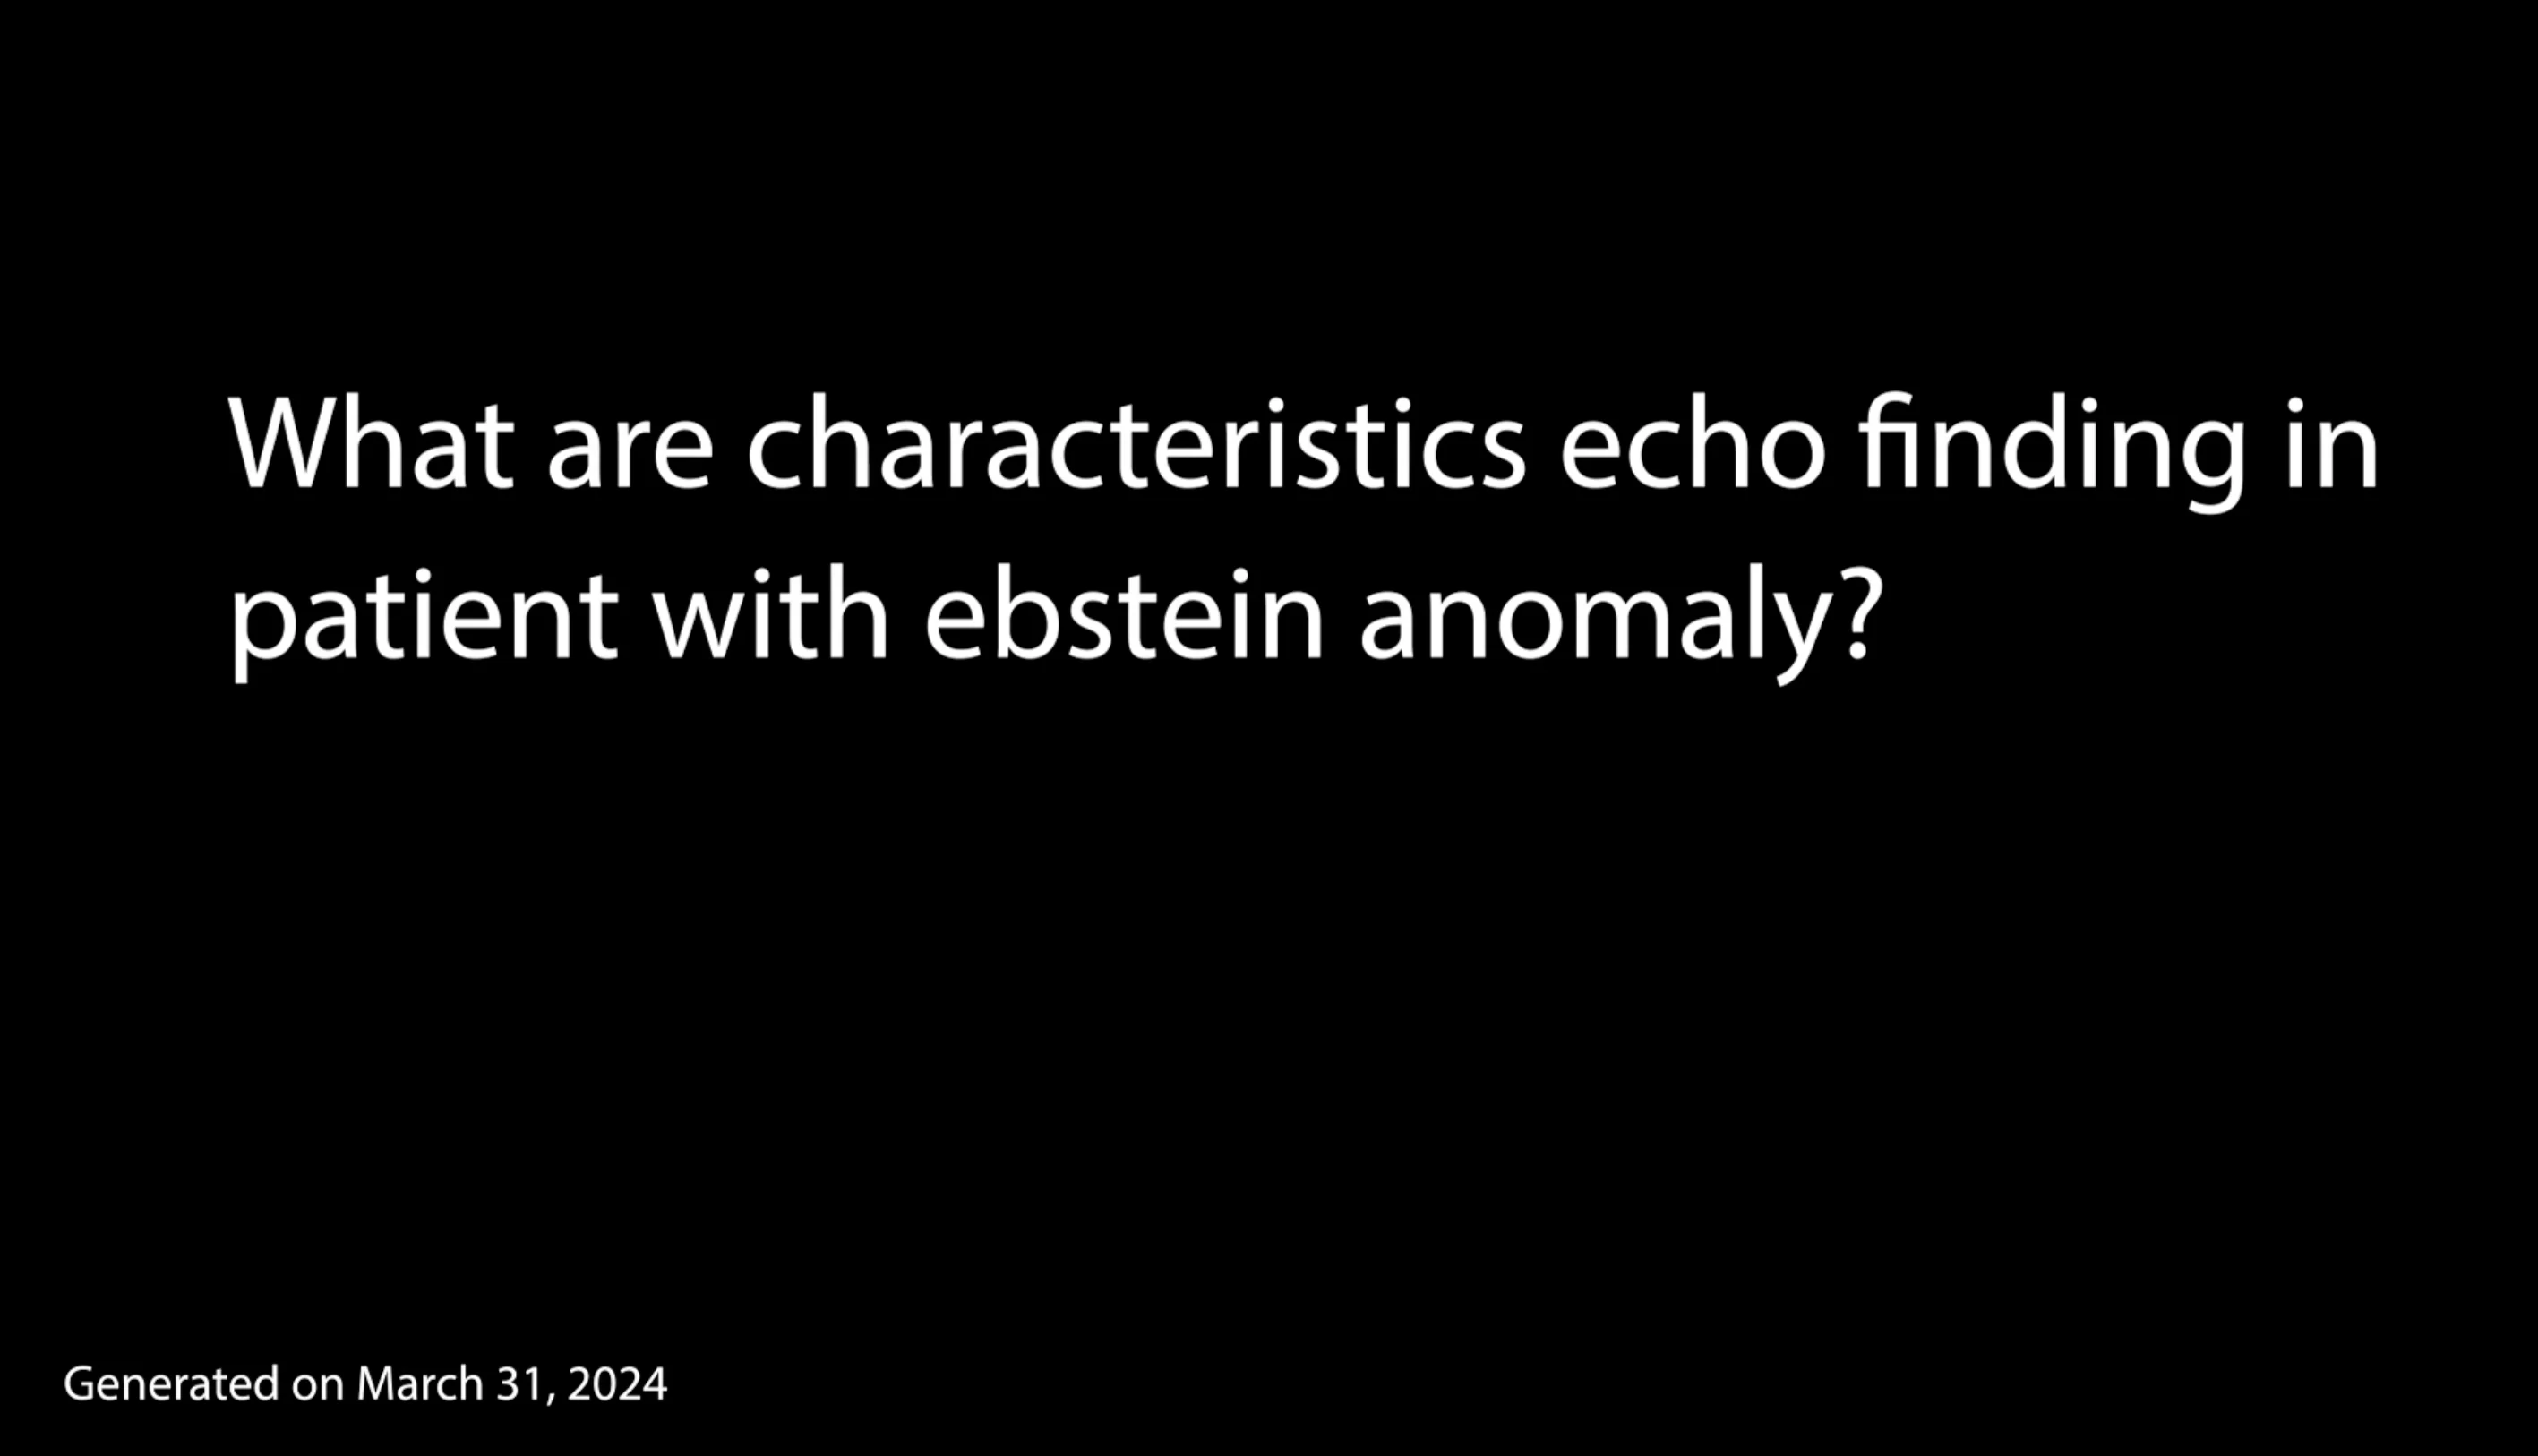 What are characteristics echo finding in patient with ebstein anomaly